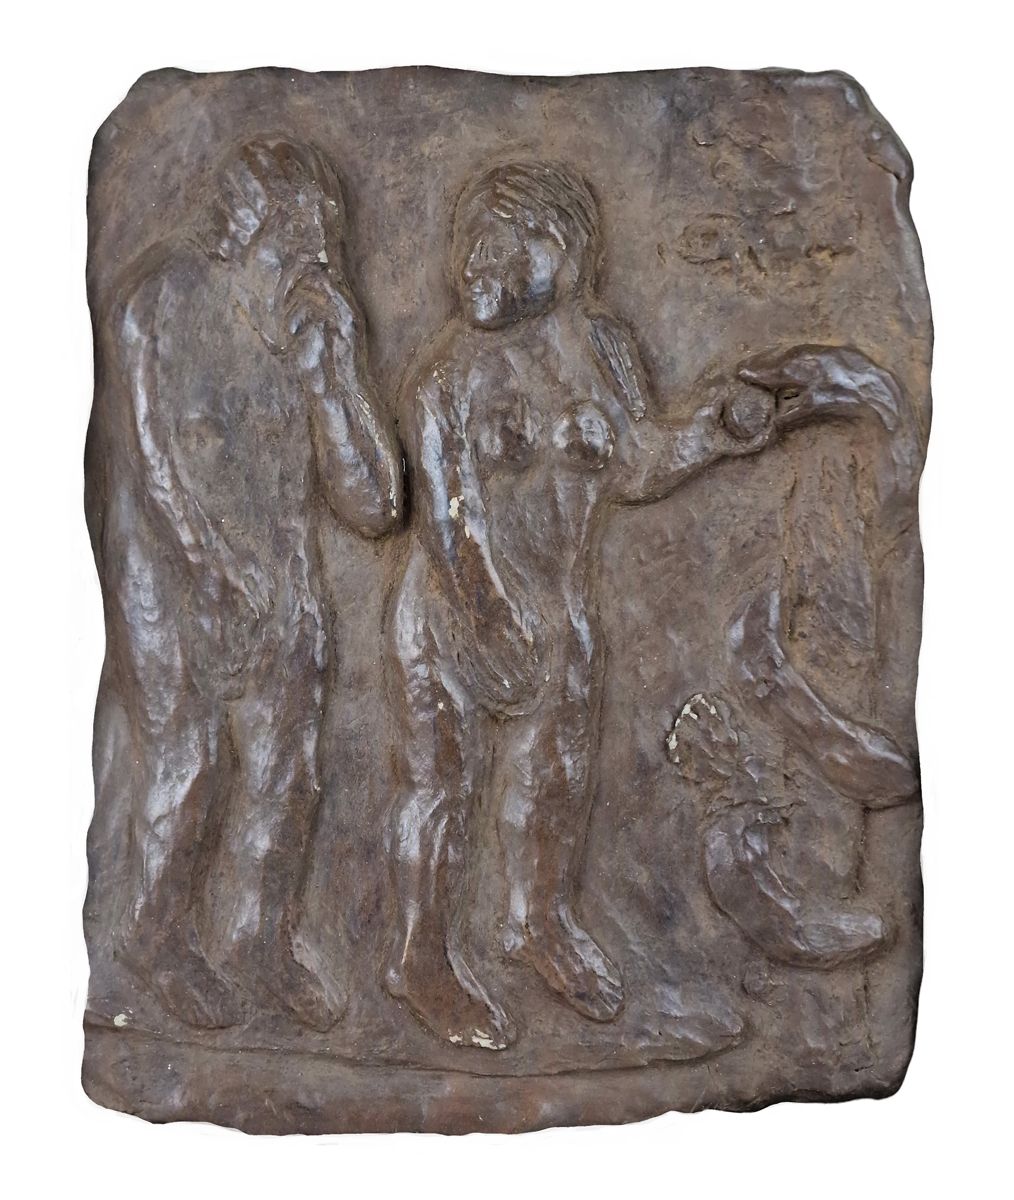 ANGELA SORMANI 20ème SIECLE Adam and Eve
Bas-relief in terracotta with brown pat&hellip;